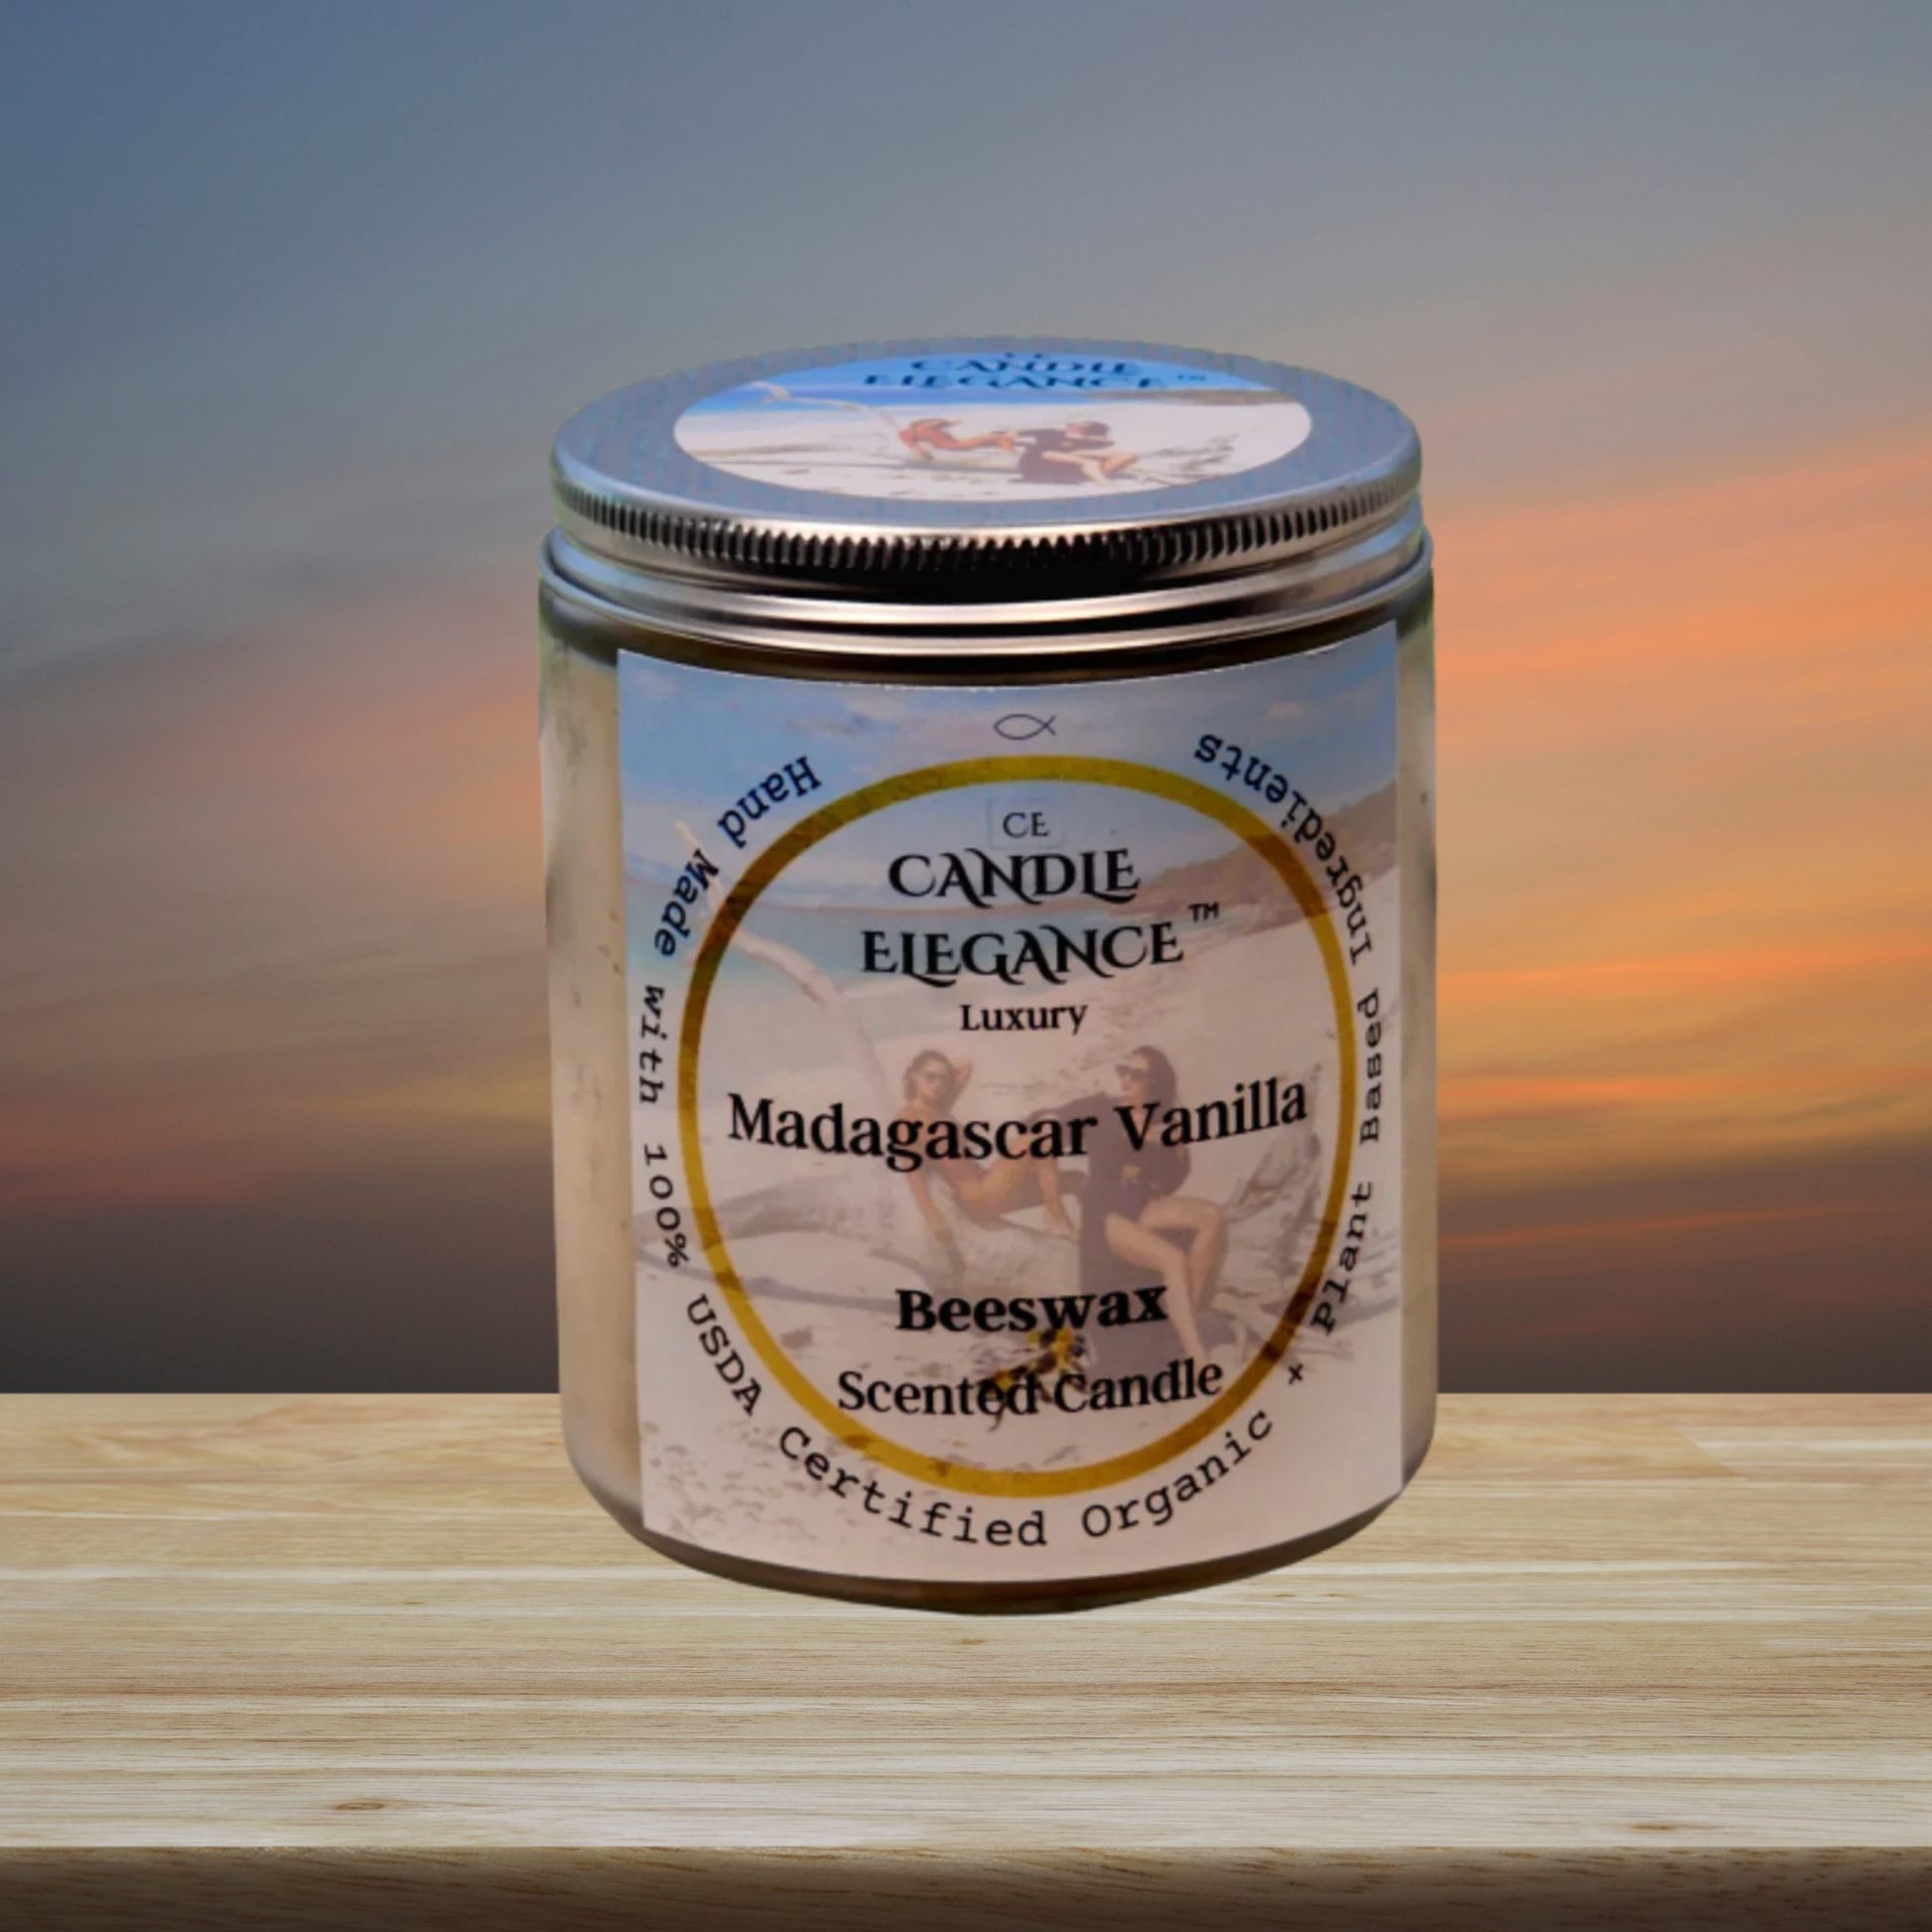 Candle Elegance Madagascar Vanilla Trio express is a great way to add a sweet and relaxing honey scent to your home, workplace, or travels. It features a rich and creamy scent refreshing of Madagascar vanilla beans.